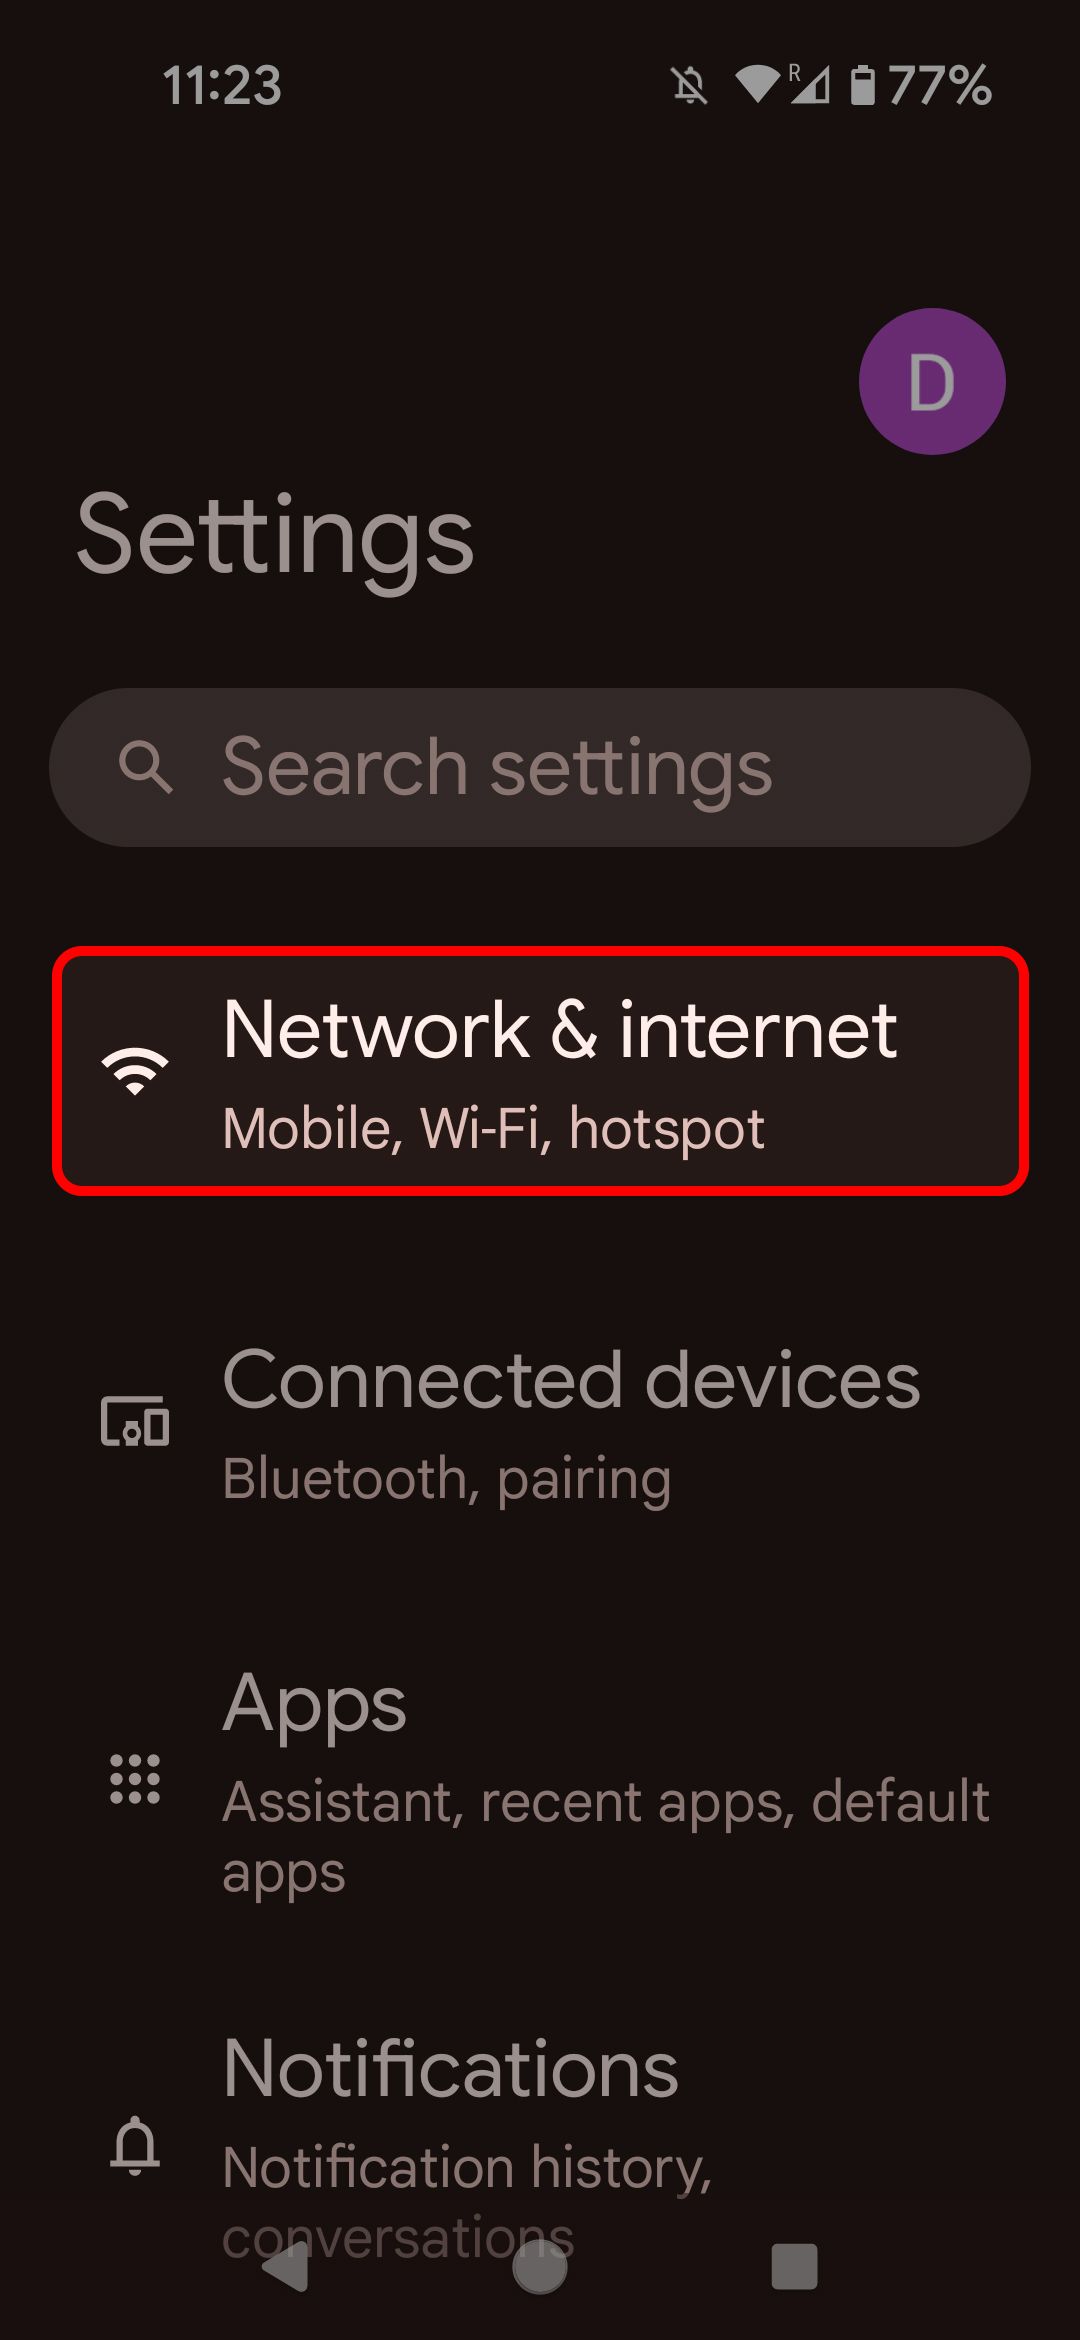 Android settings menu highlighting the Network & Internet option